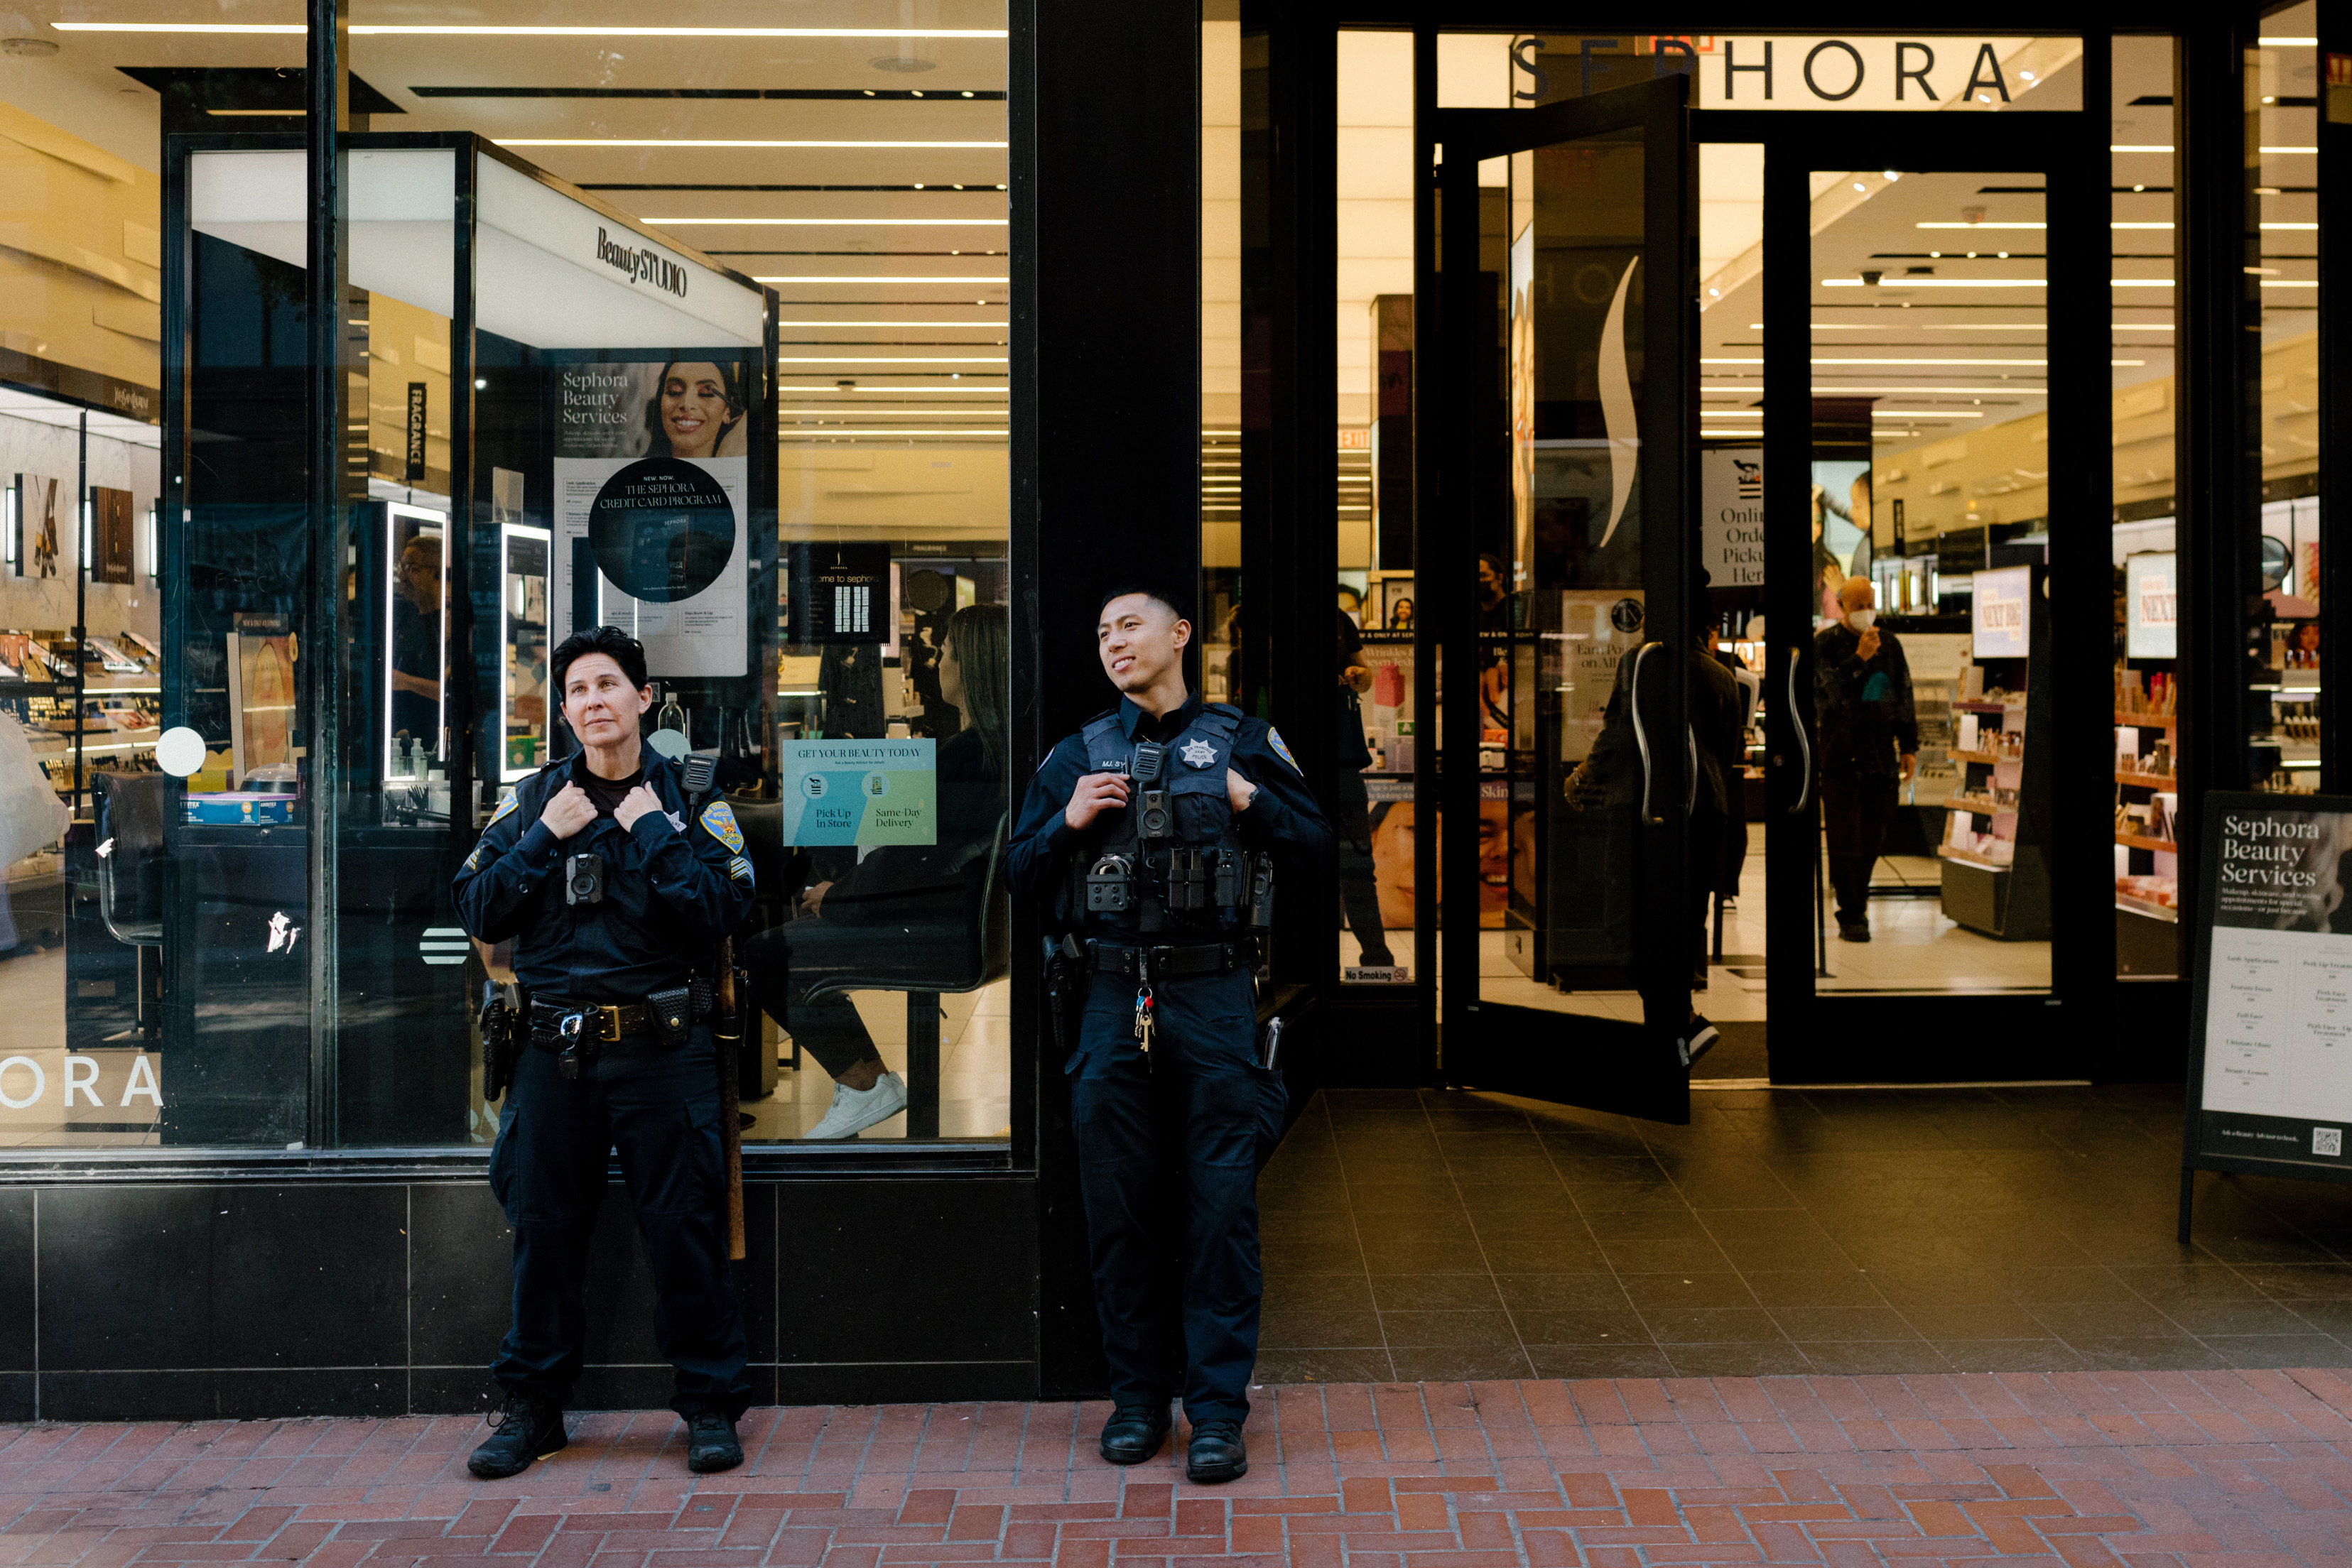 Two police officers, in uniform with vests, stand outside a Sephora store; one officer looks ahead, while the other looks upward. The store entrance is open.